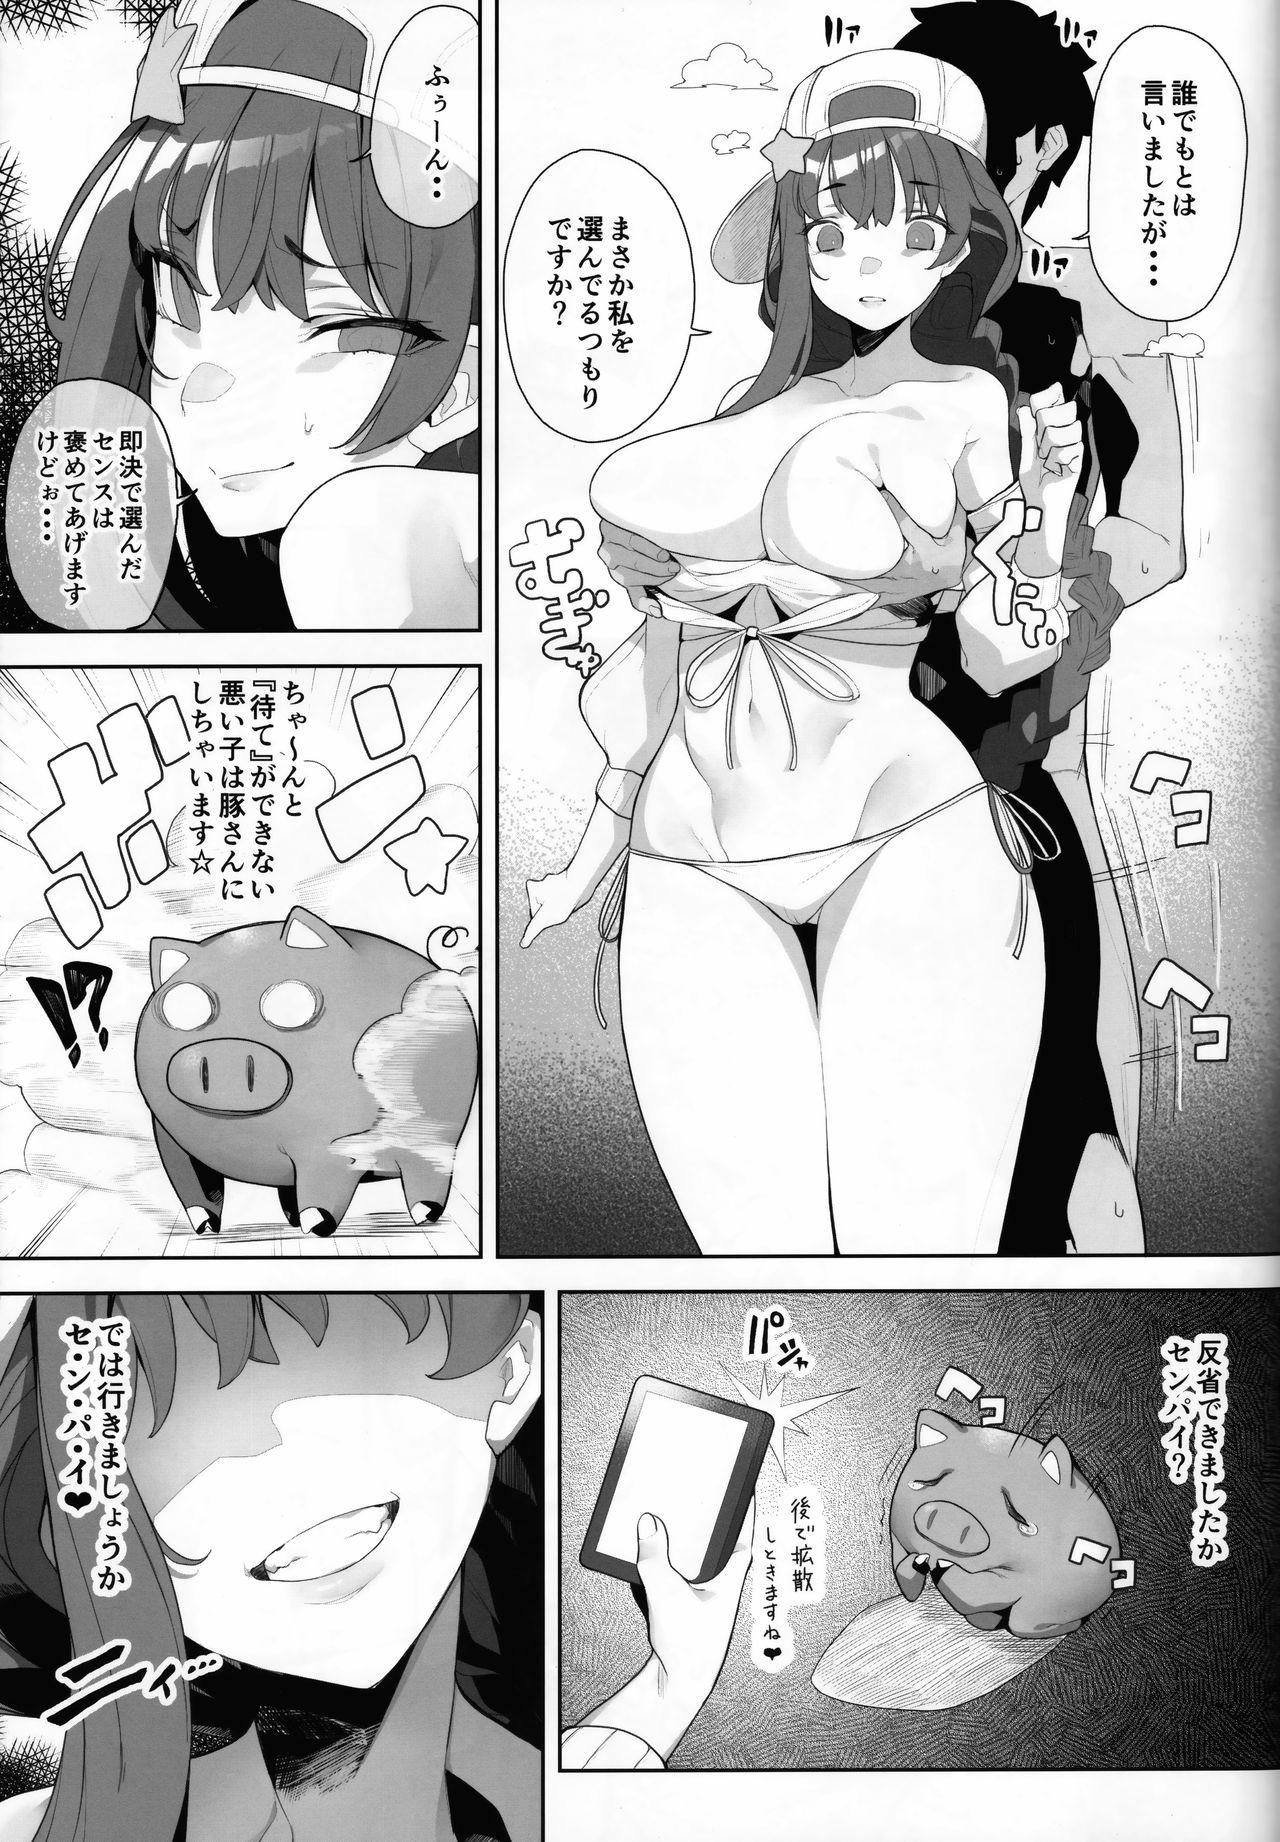 Cheating Wife LOVE BONUS TIME IN LULUHAWA - Fate grand order Pussy Lick - Page 4